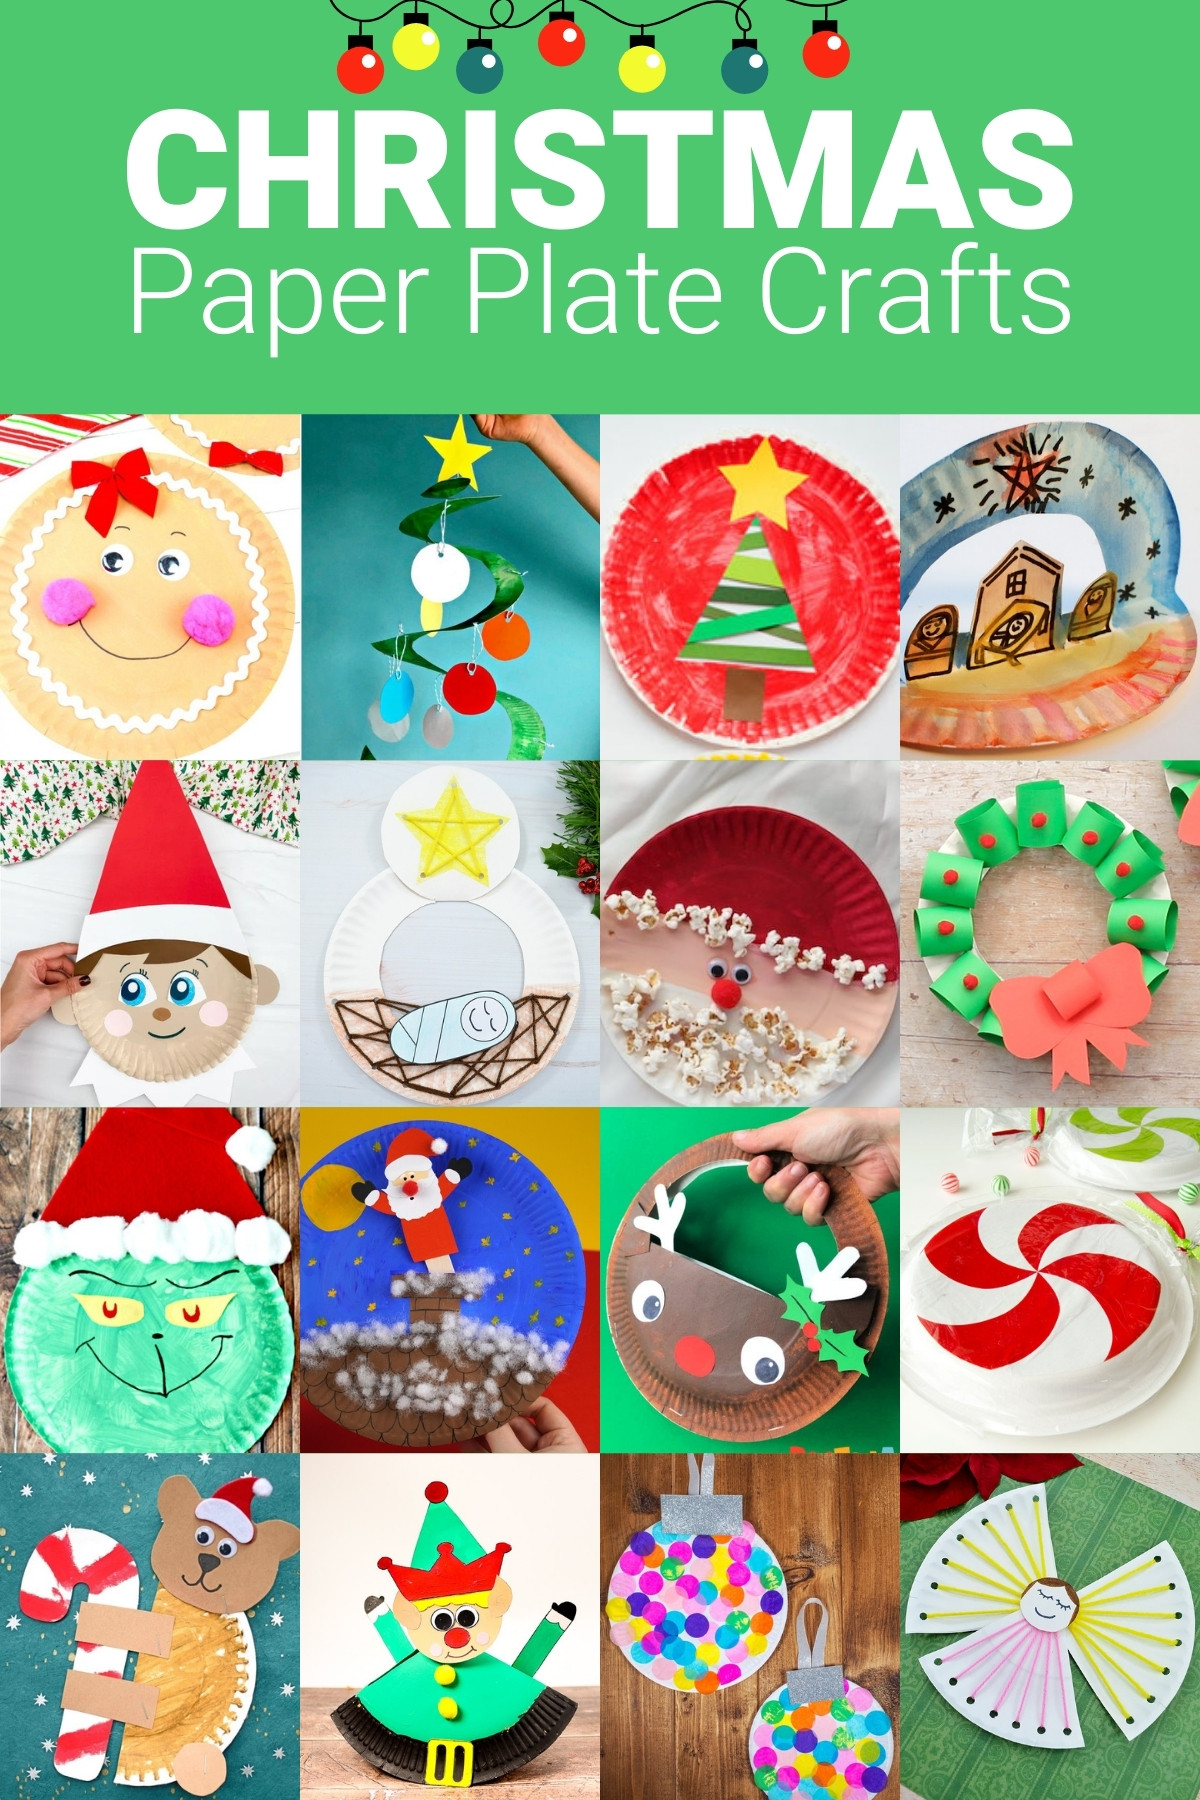 Paper Plate Crafts for Christmas